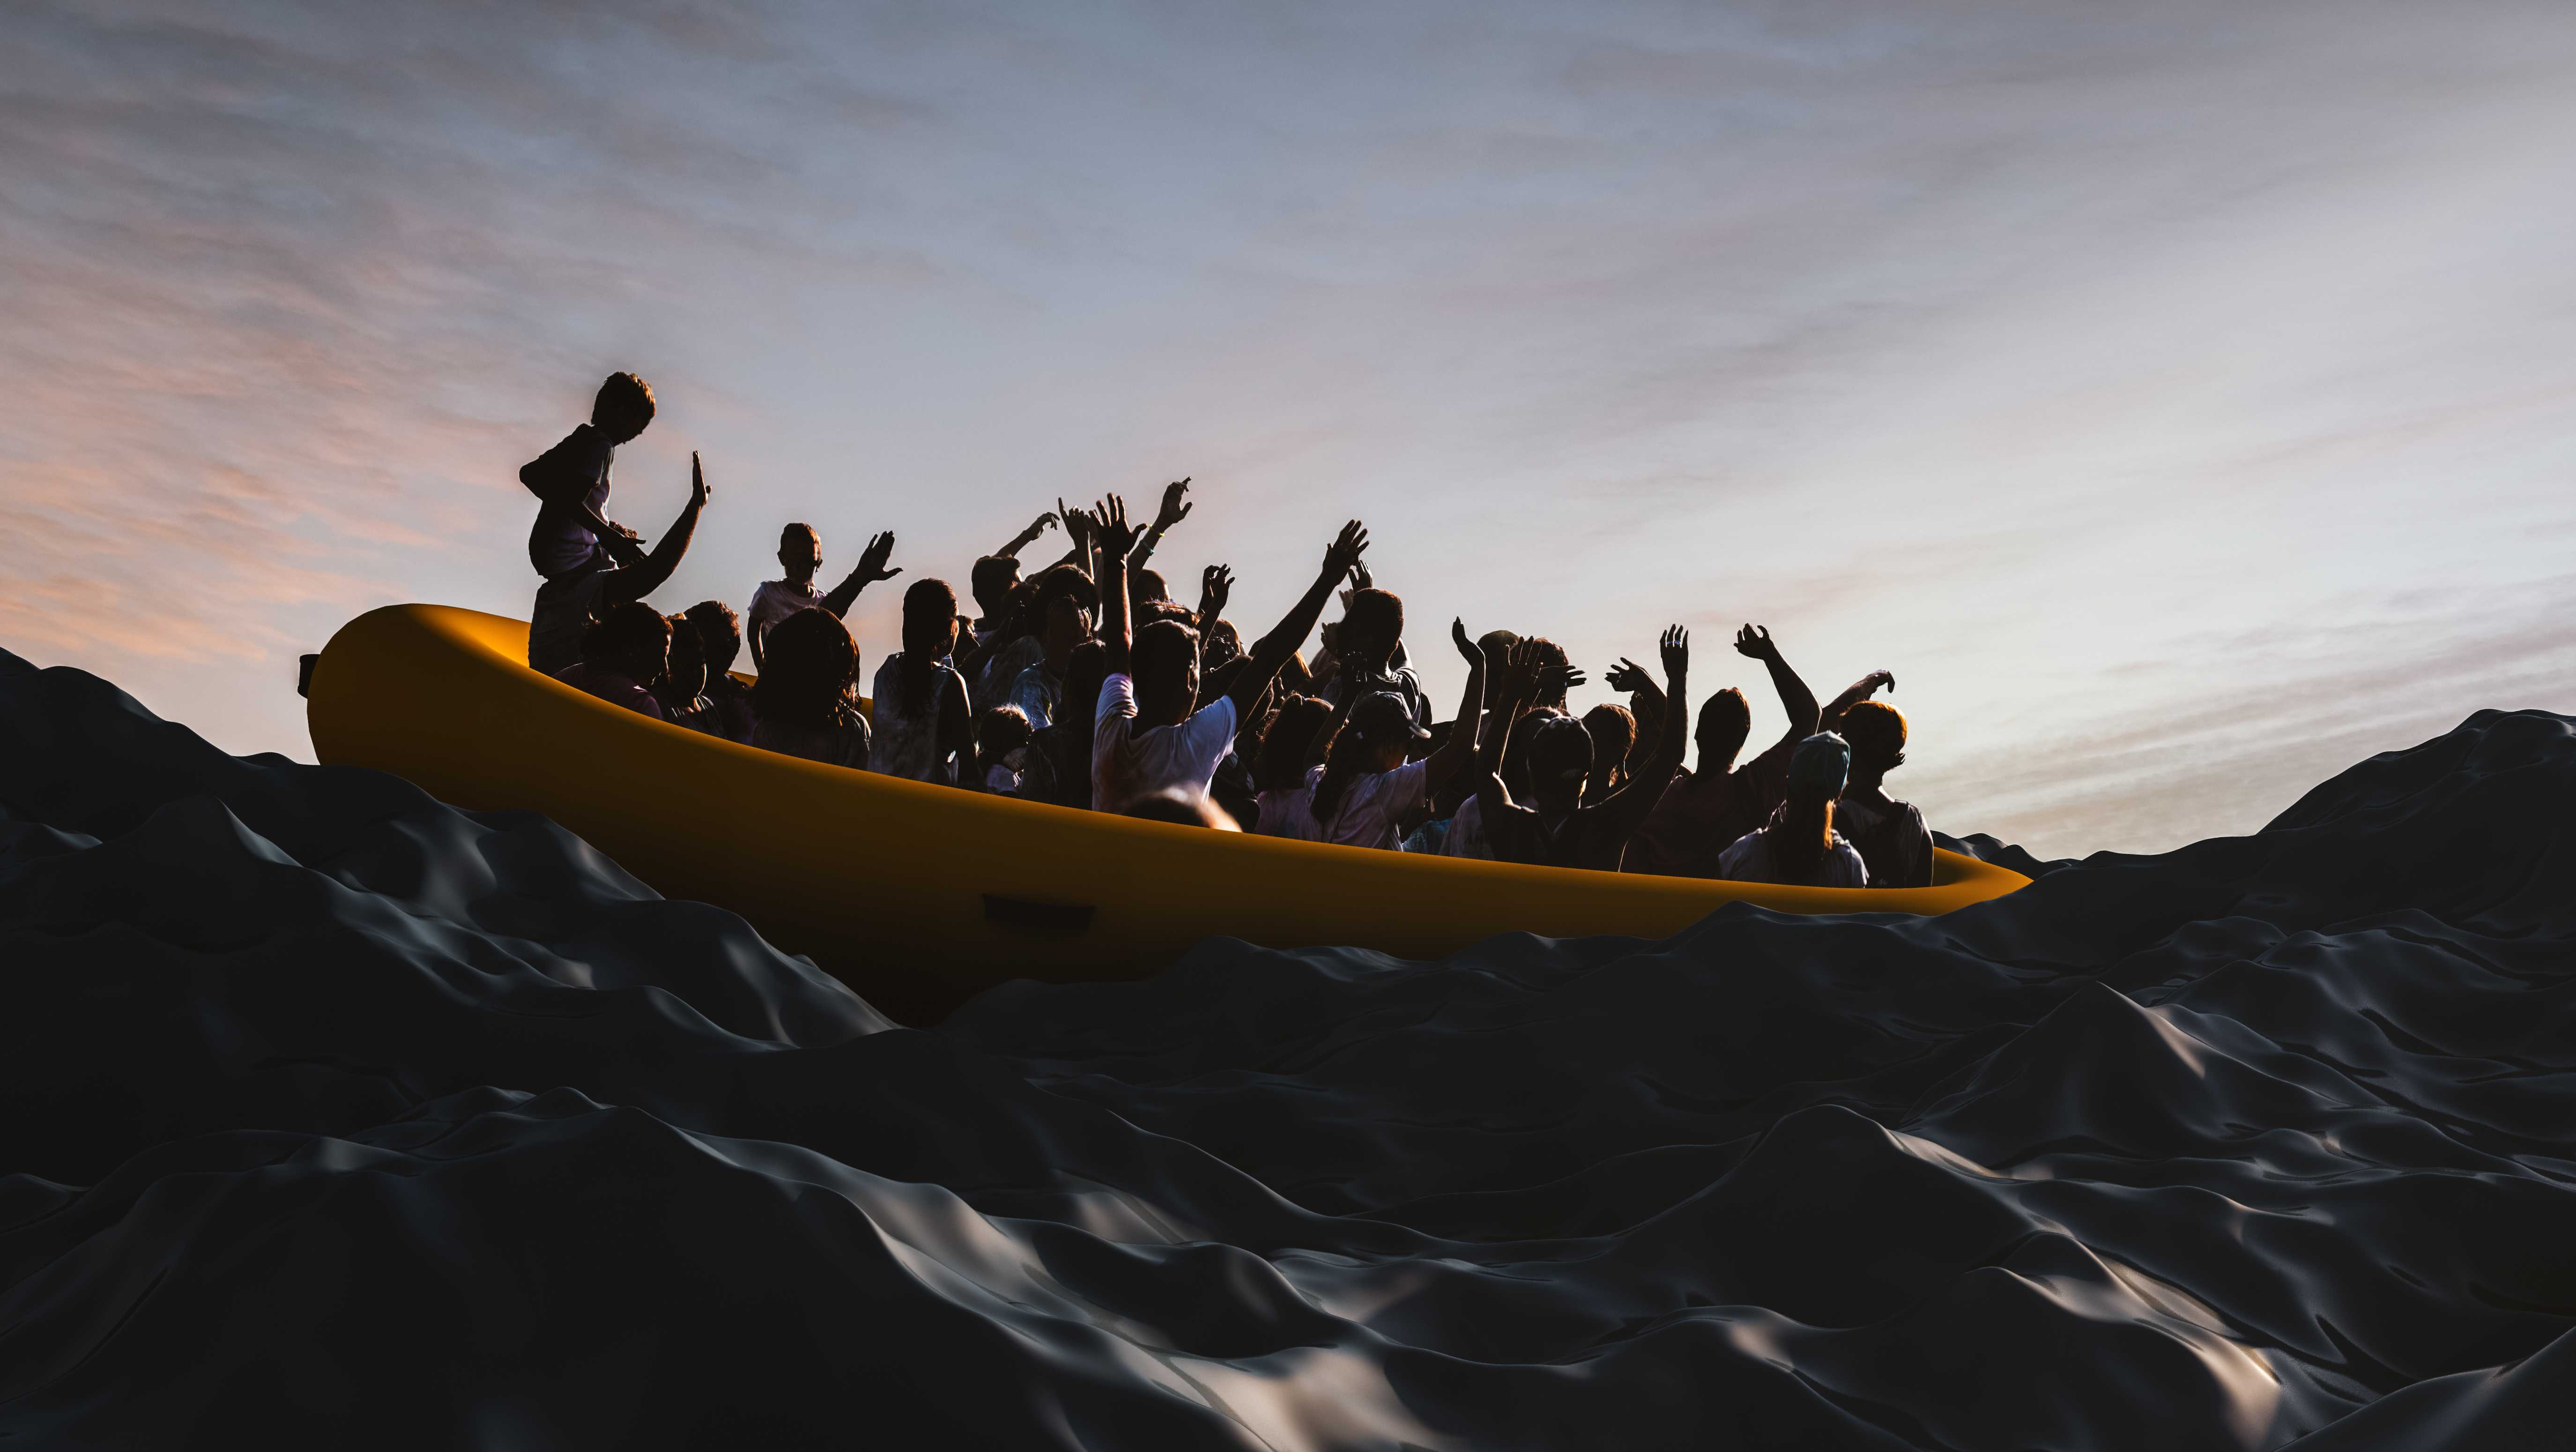 Illegal Migrant overcrowded boat